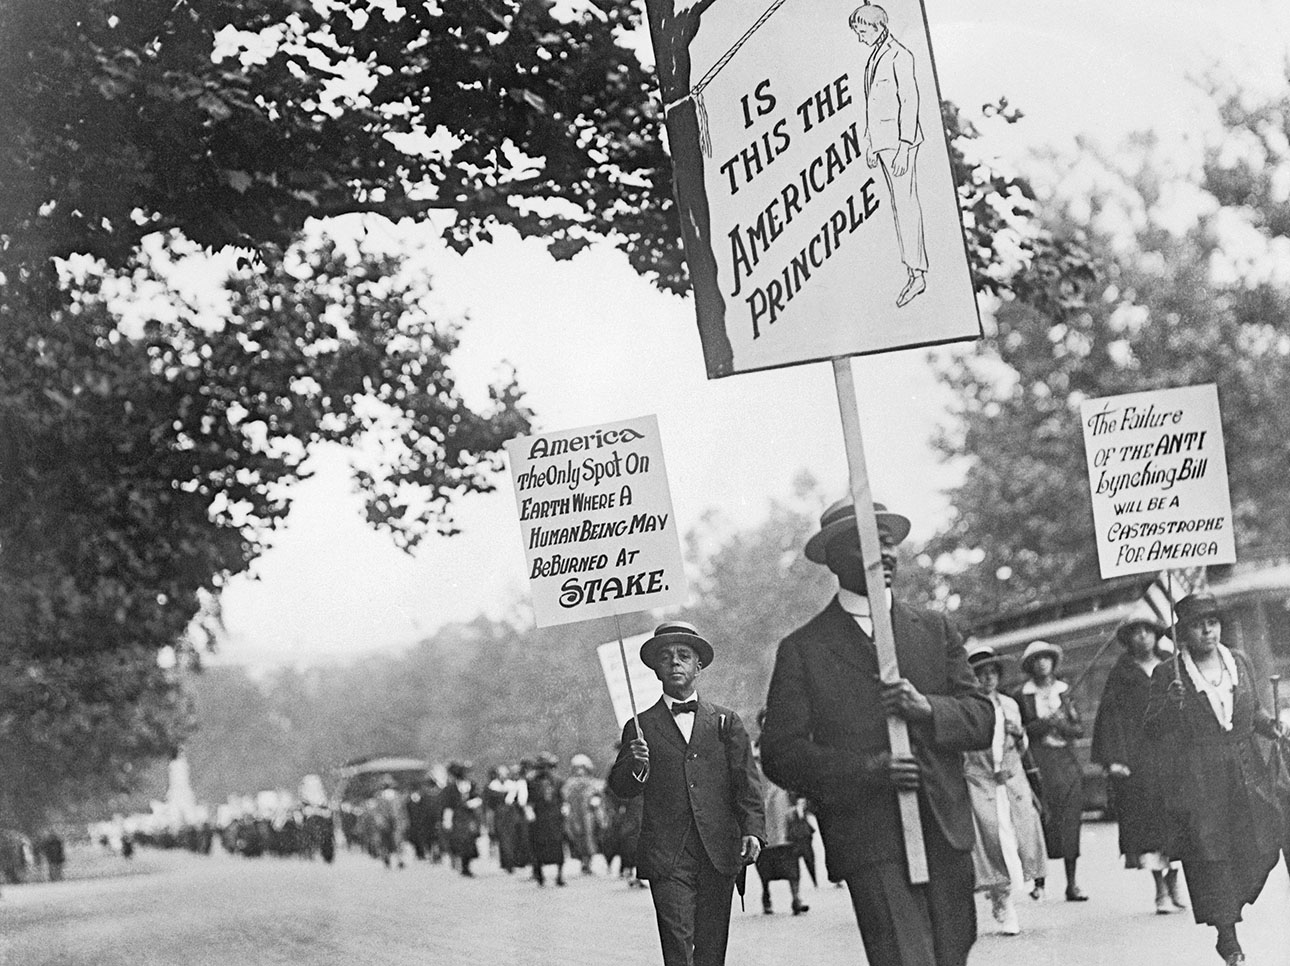 1922 Protest